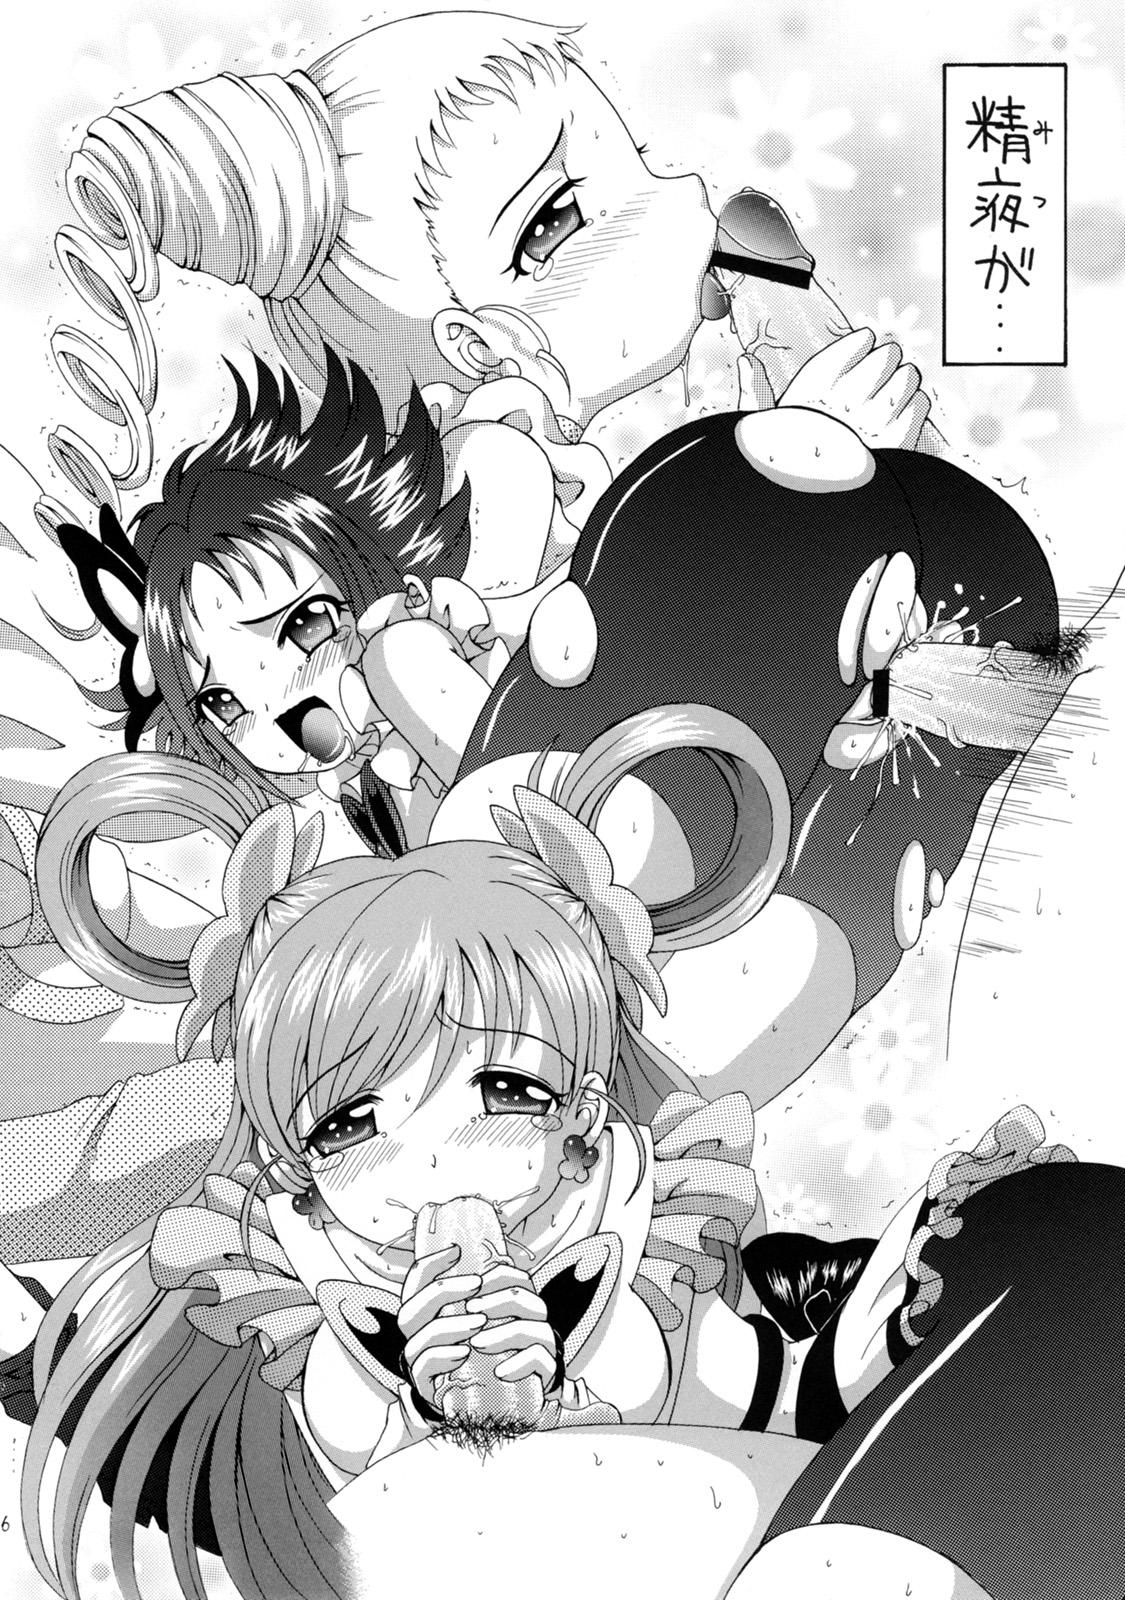 Masseuse Yes! Five 1 - Pretty cure Yes precure 5 Casa - Page 6